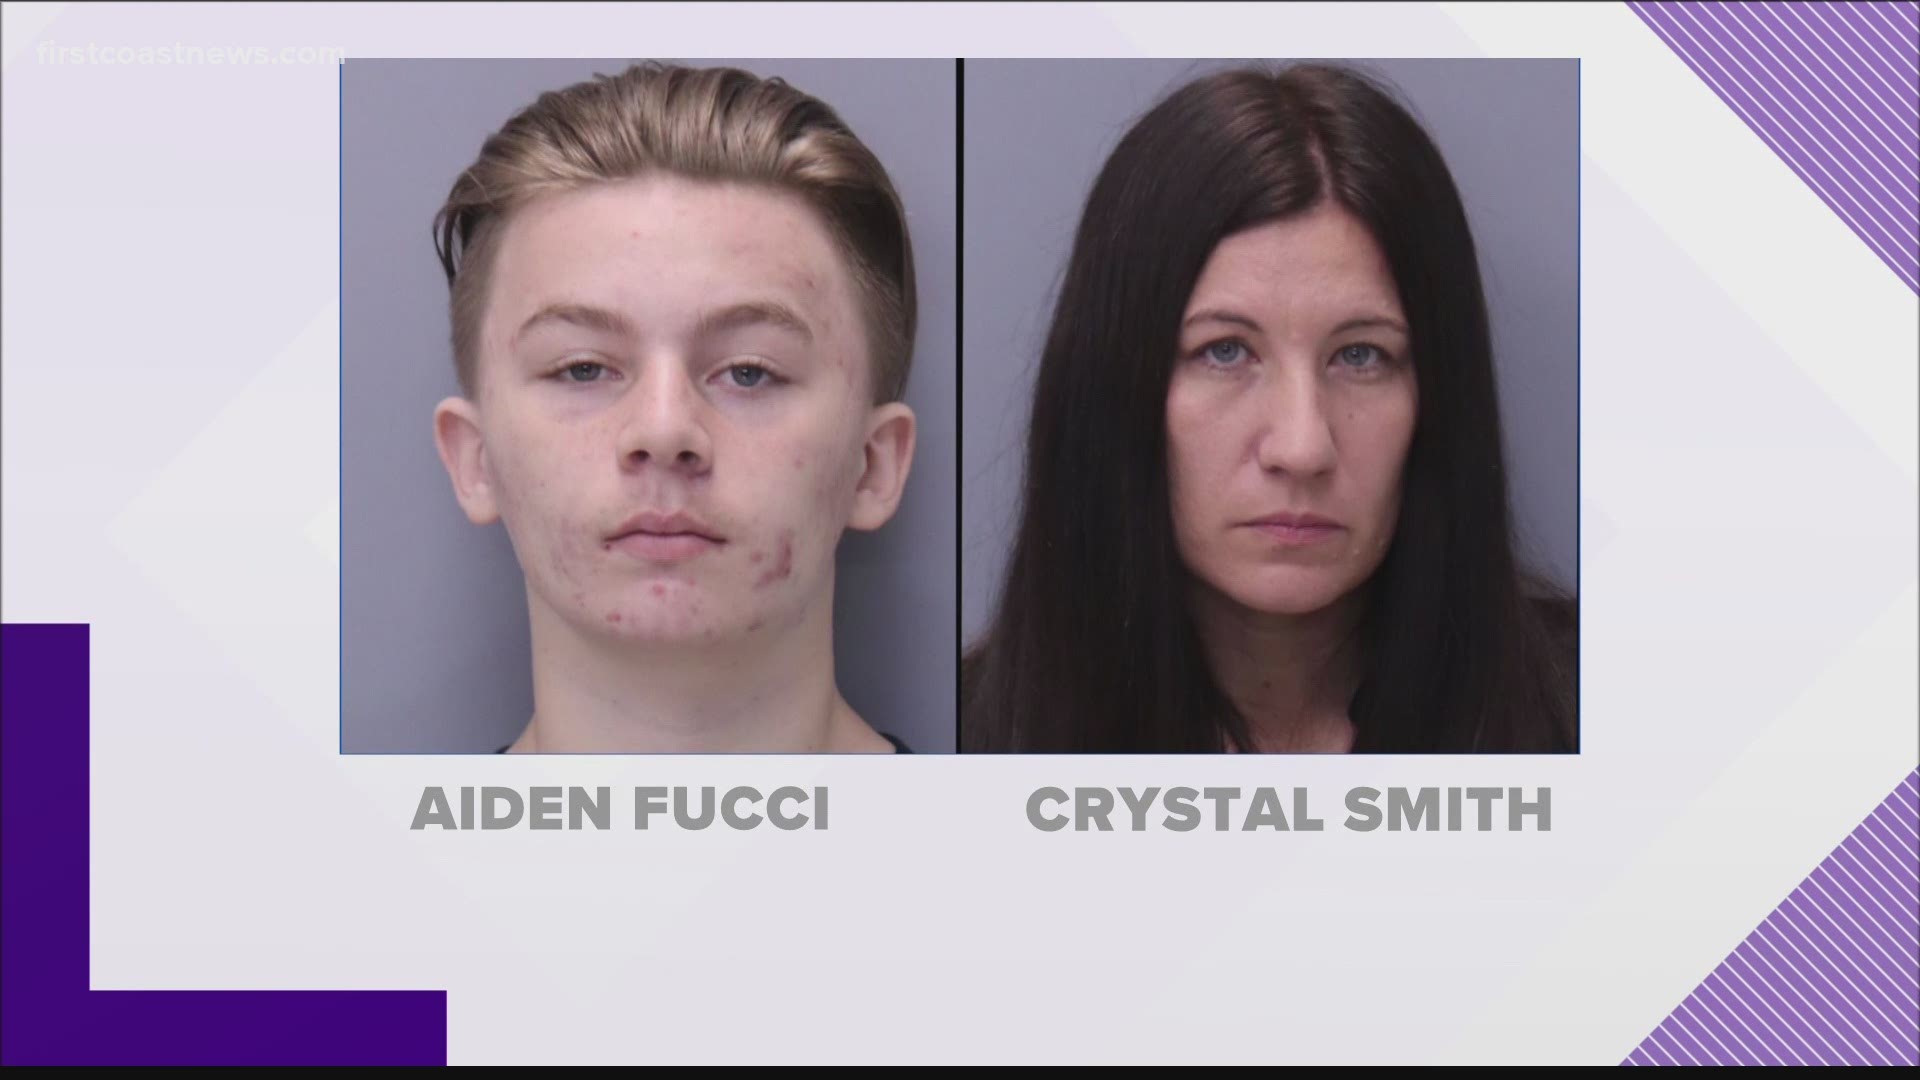 Crystal Smith, mother of Aiden Fucci, arrested, accused of tampering with evidence